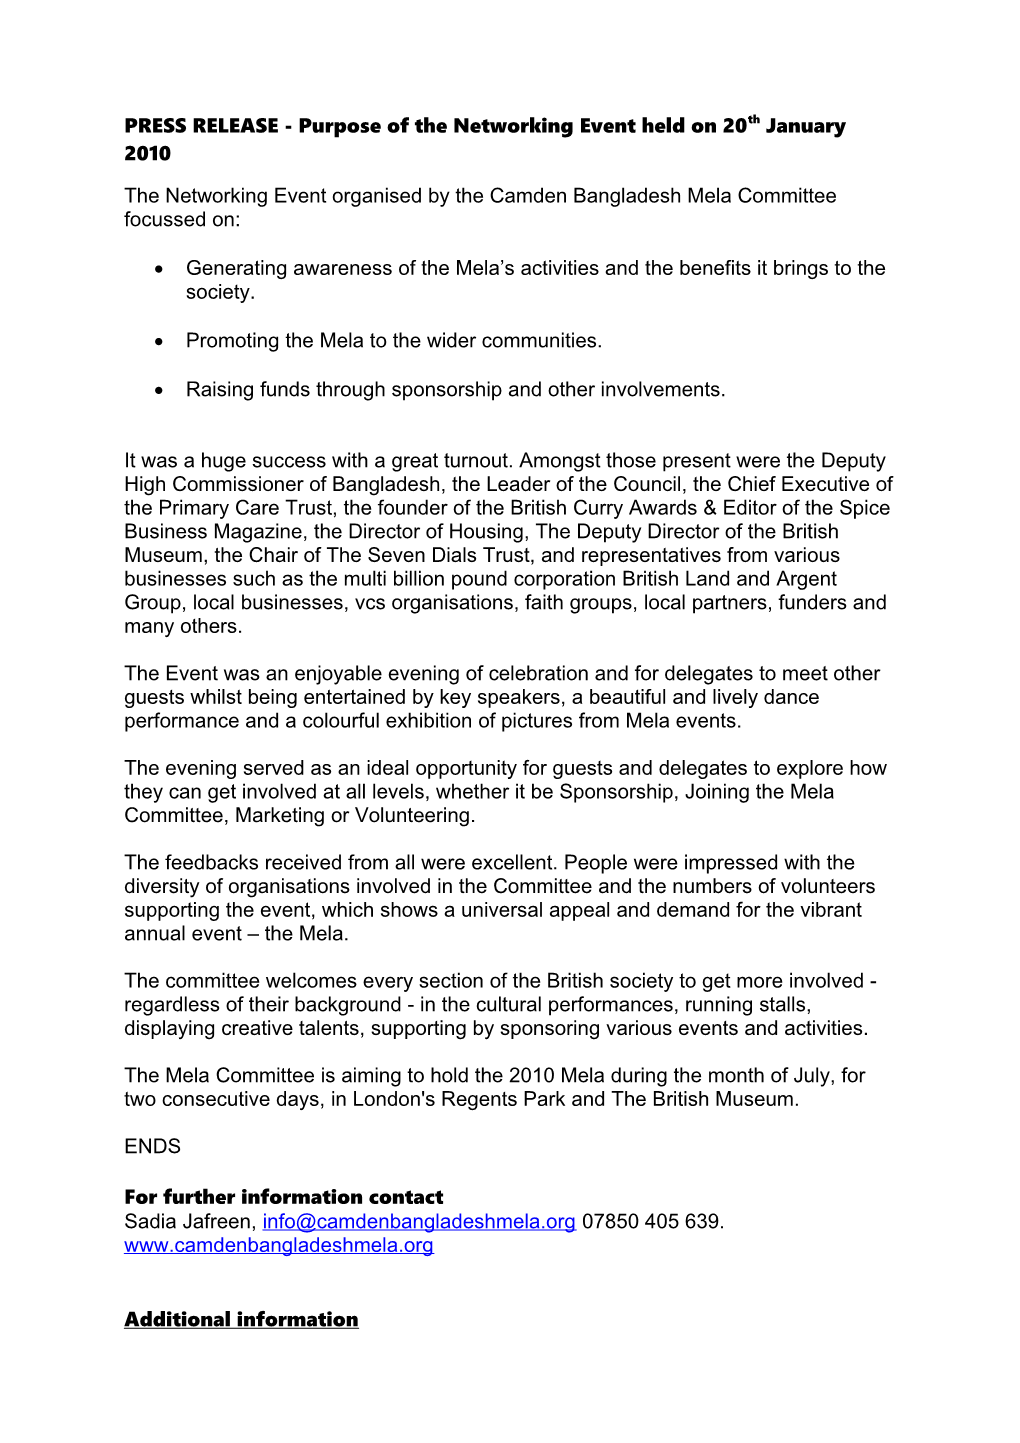 PRESS RELEASE - Purpose of the Networking Event Held on 20Th January 2010